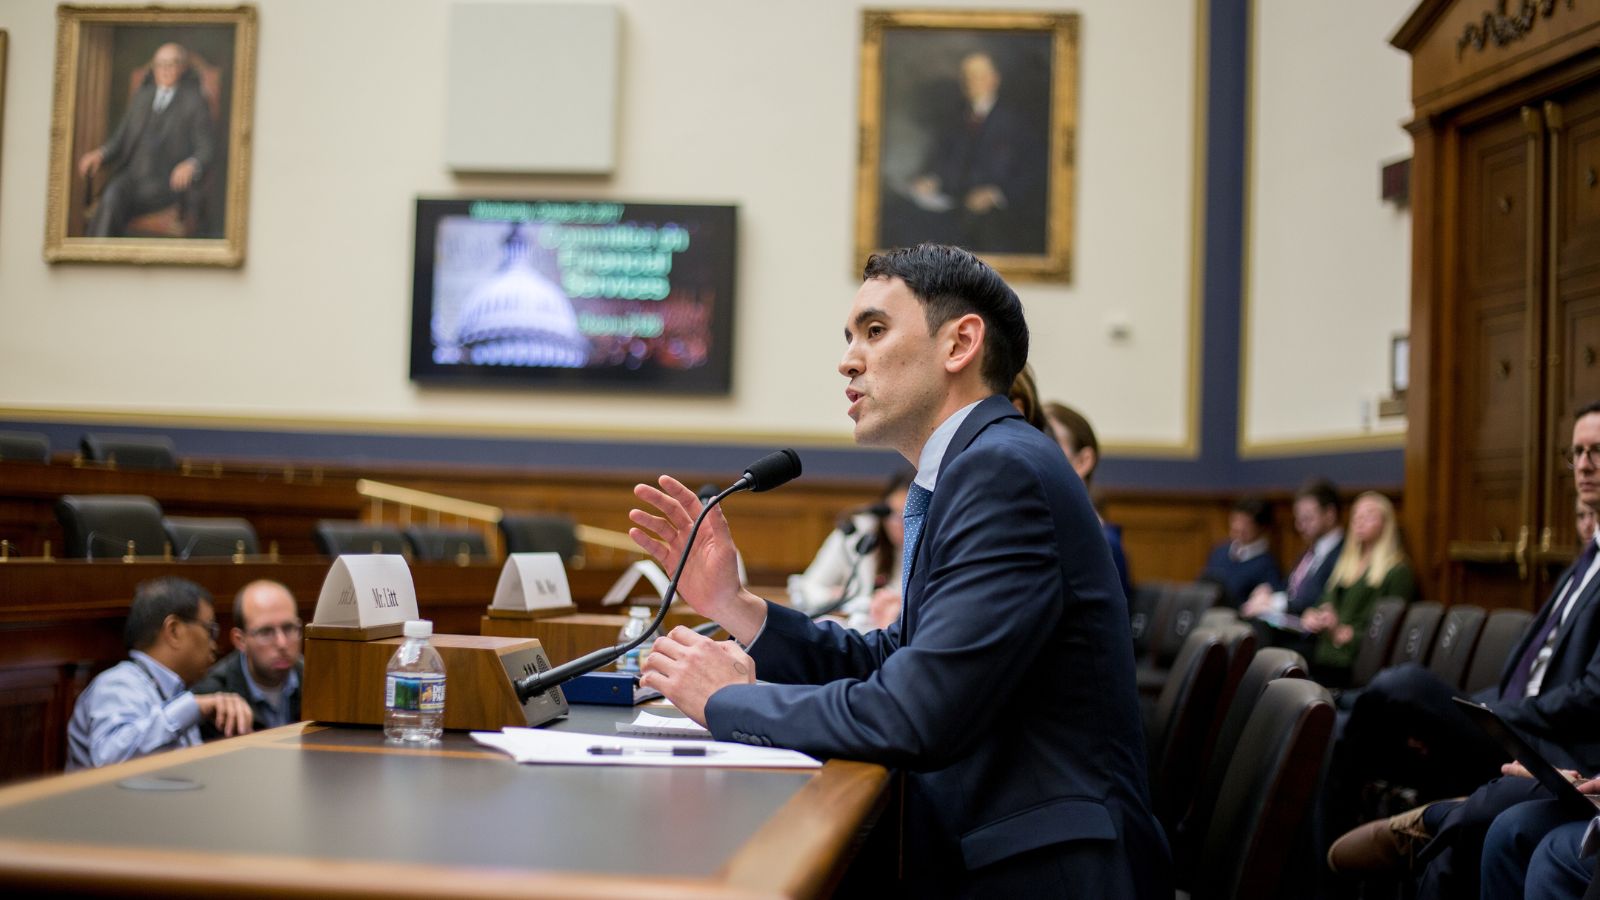 Mike Litt testifying about the Equifax data breach for the House Financial Services Committee, Oct. 2017